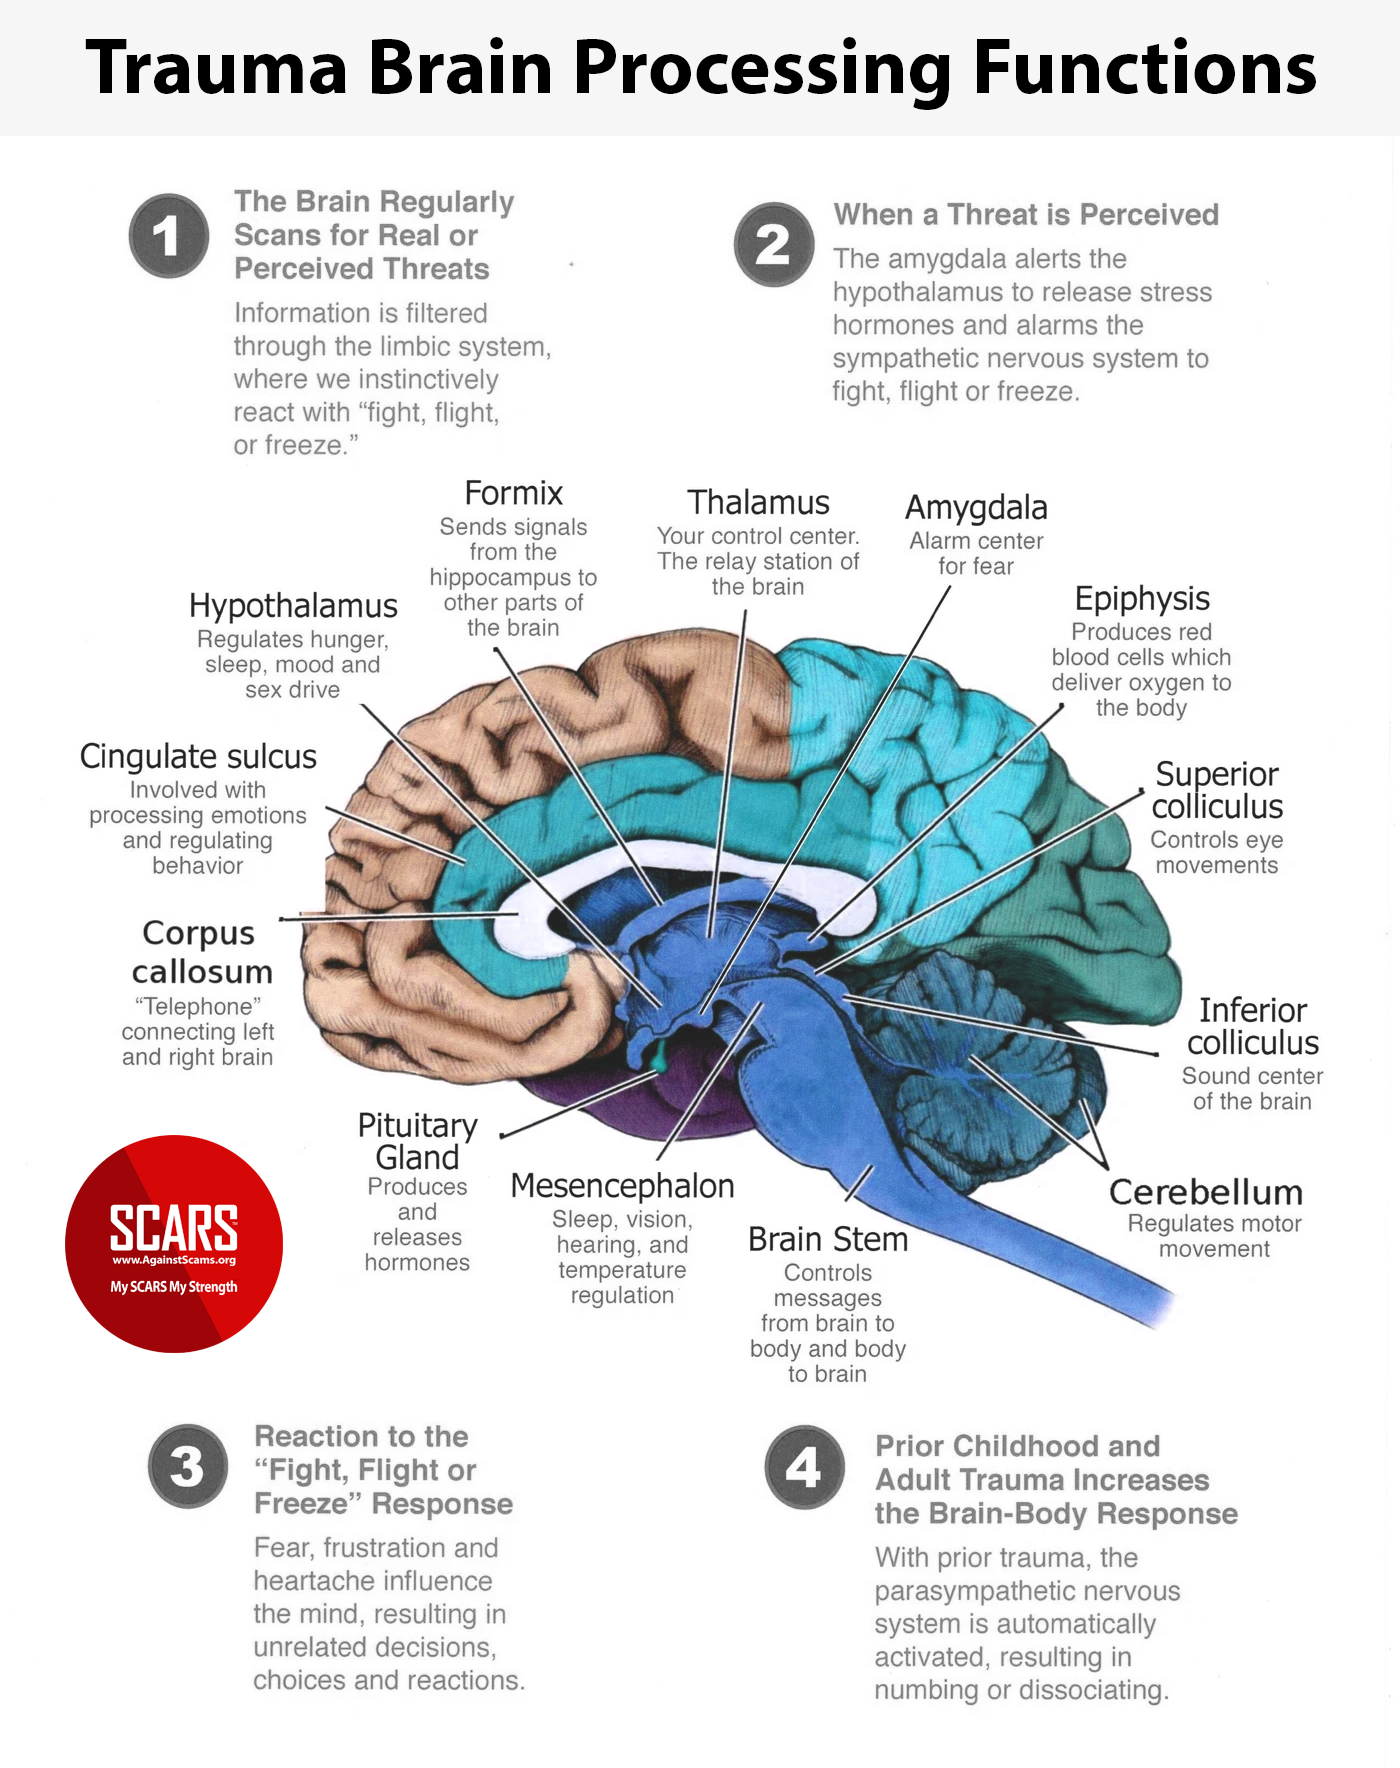 Trauma - Brain Processing Functions - Infographic 15